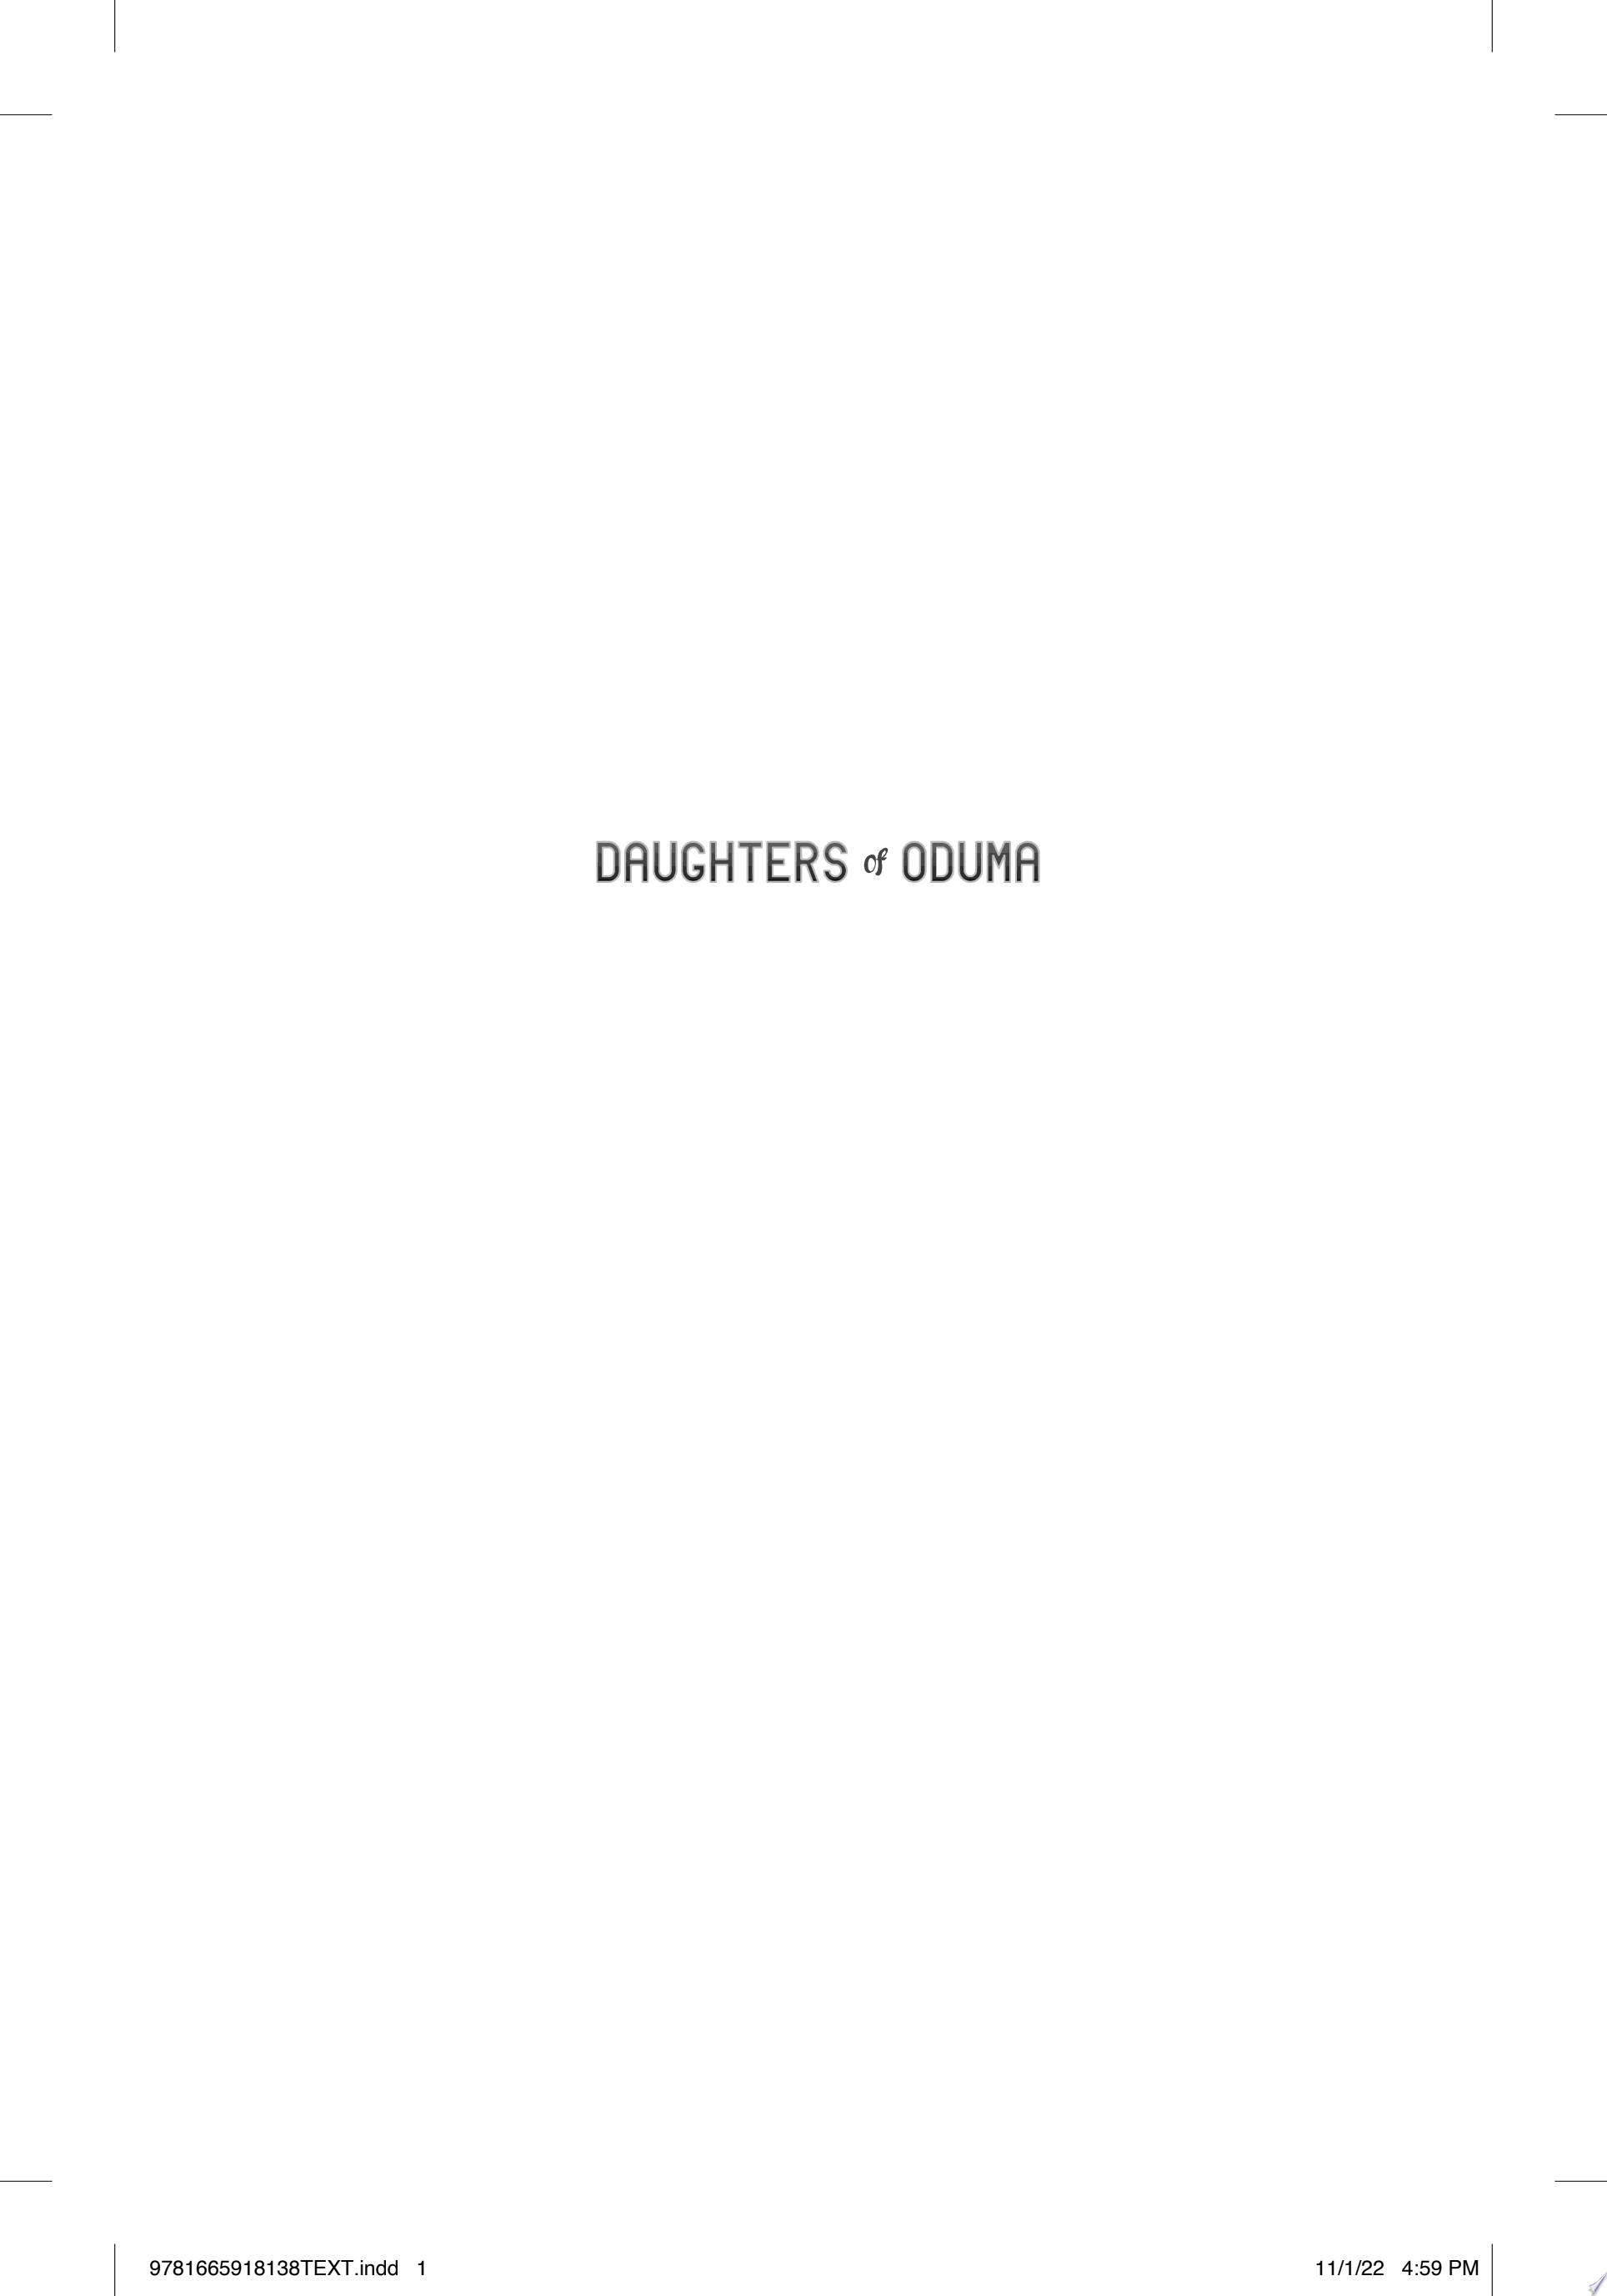 Image for "Daughters of Oduma"